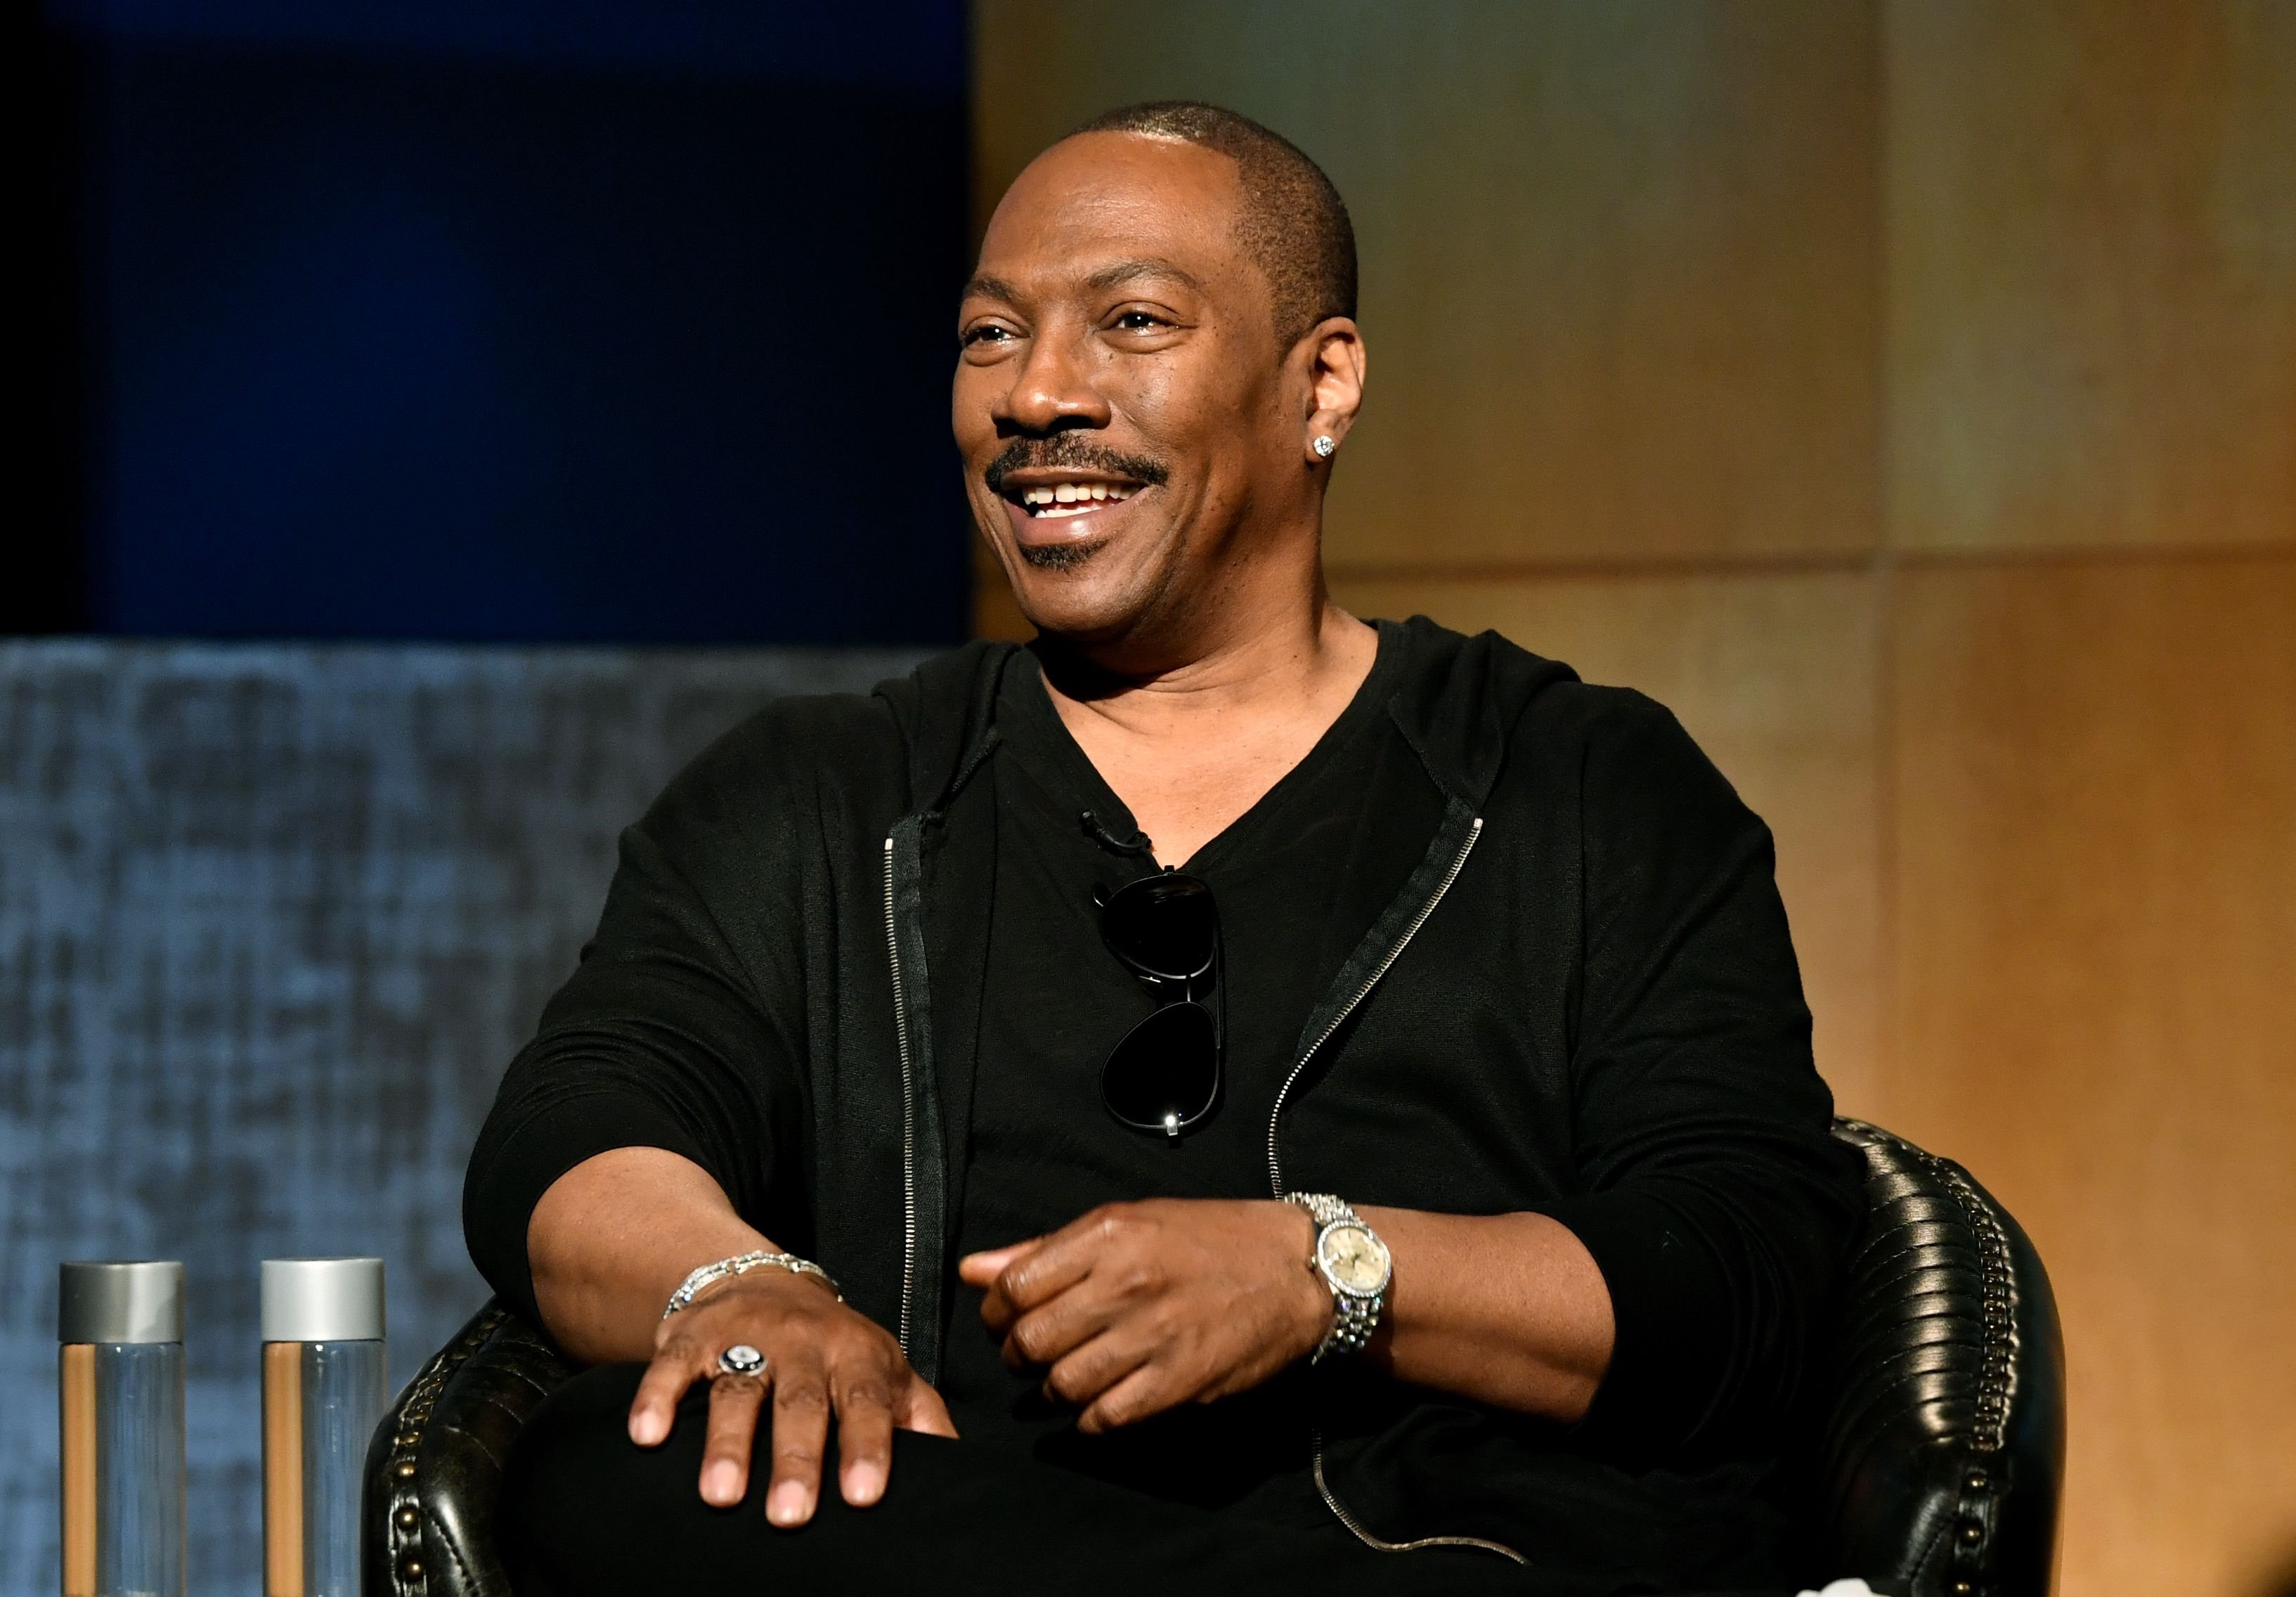 Eddie Murphy at the LA Tastemaker event for "Comedians in Cars" on July 17, 2019 in Beverly Hills City Photo. | Photo: Getty Images